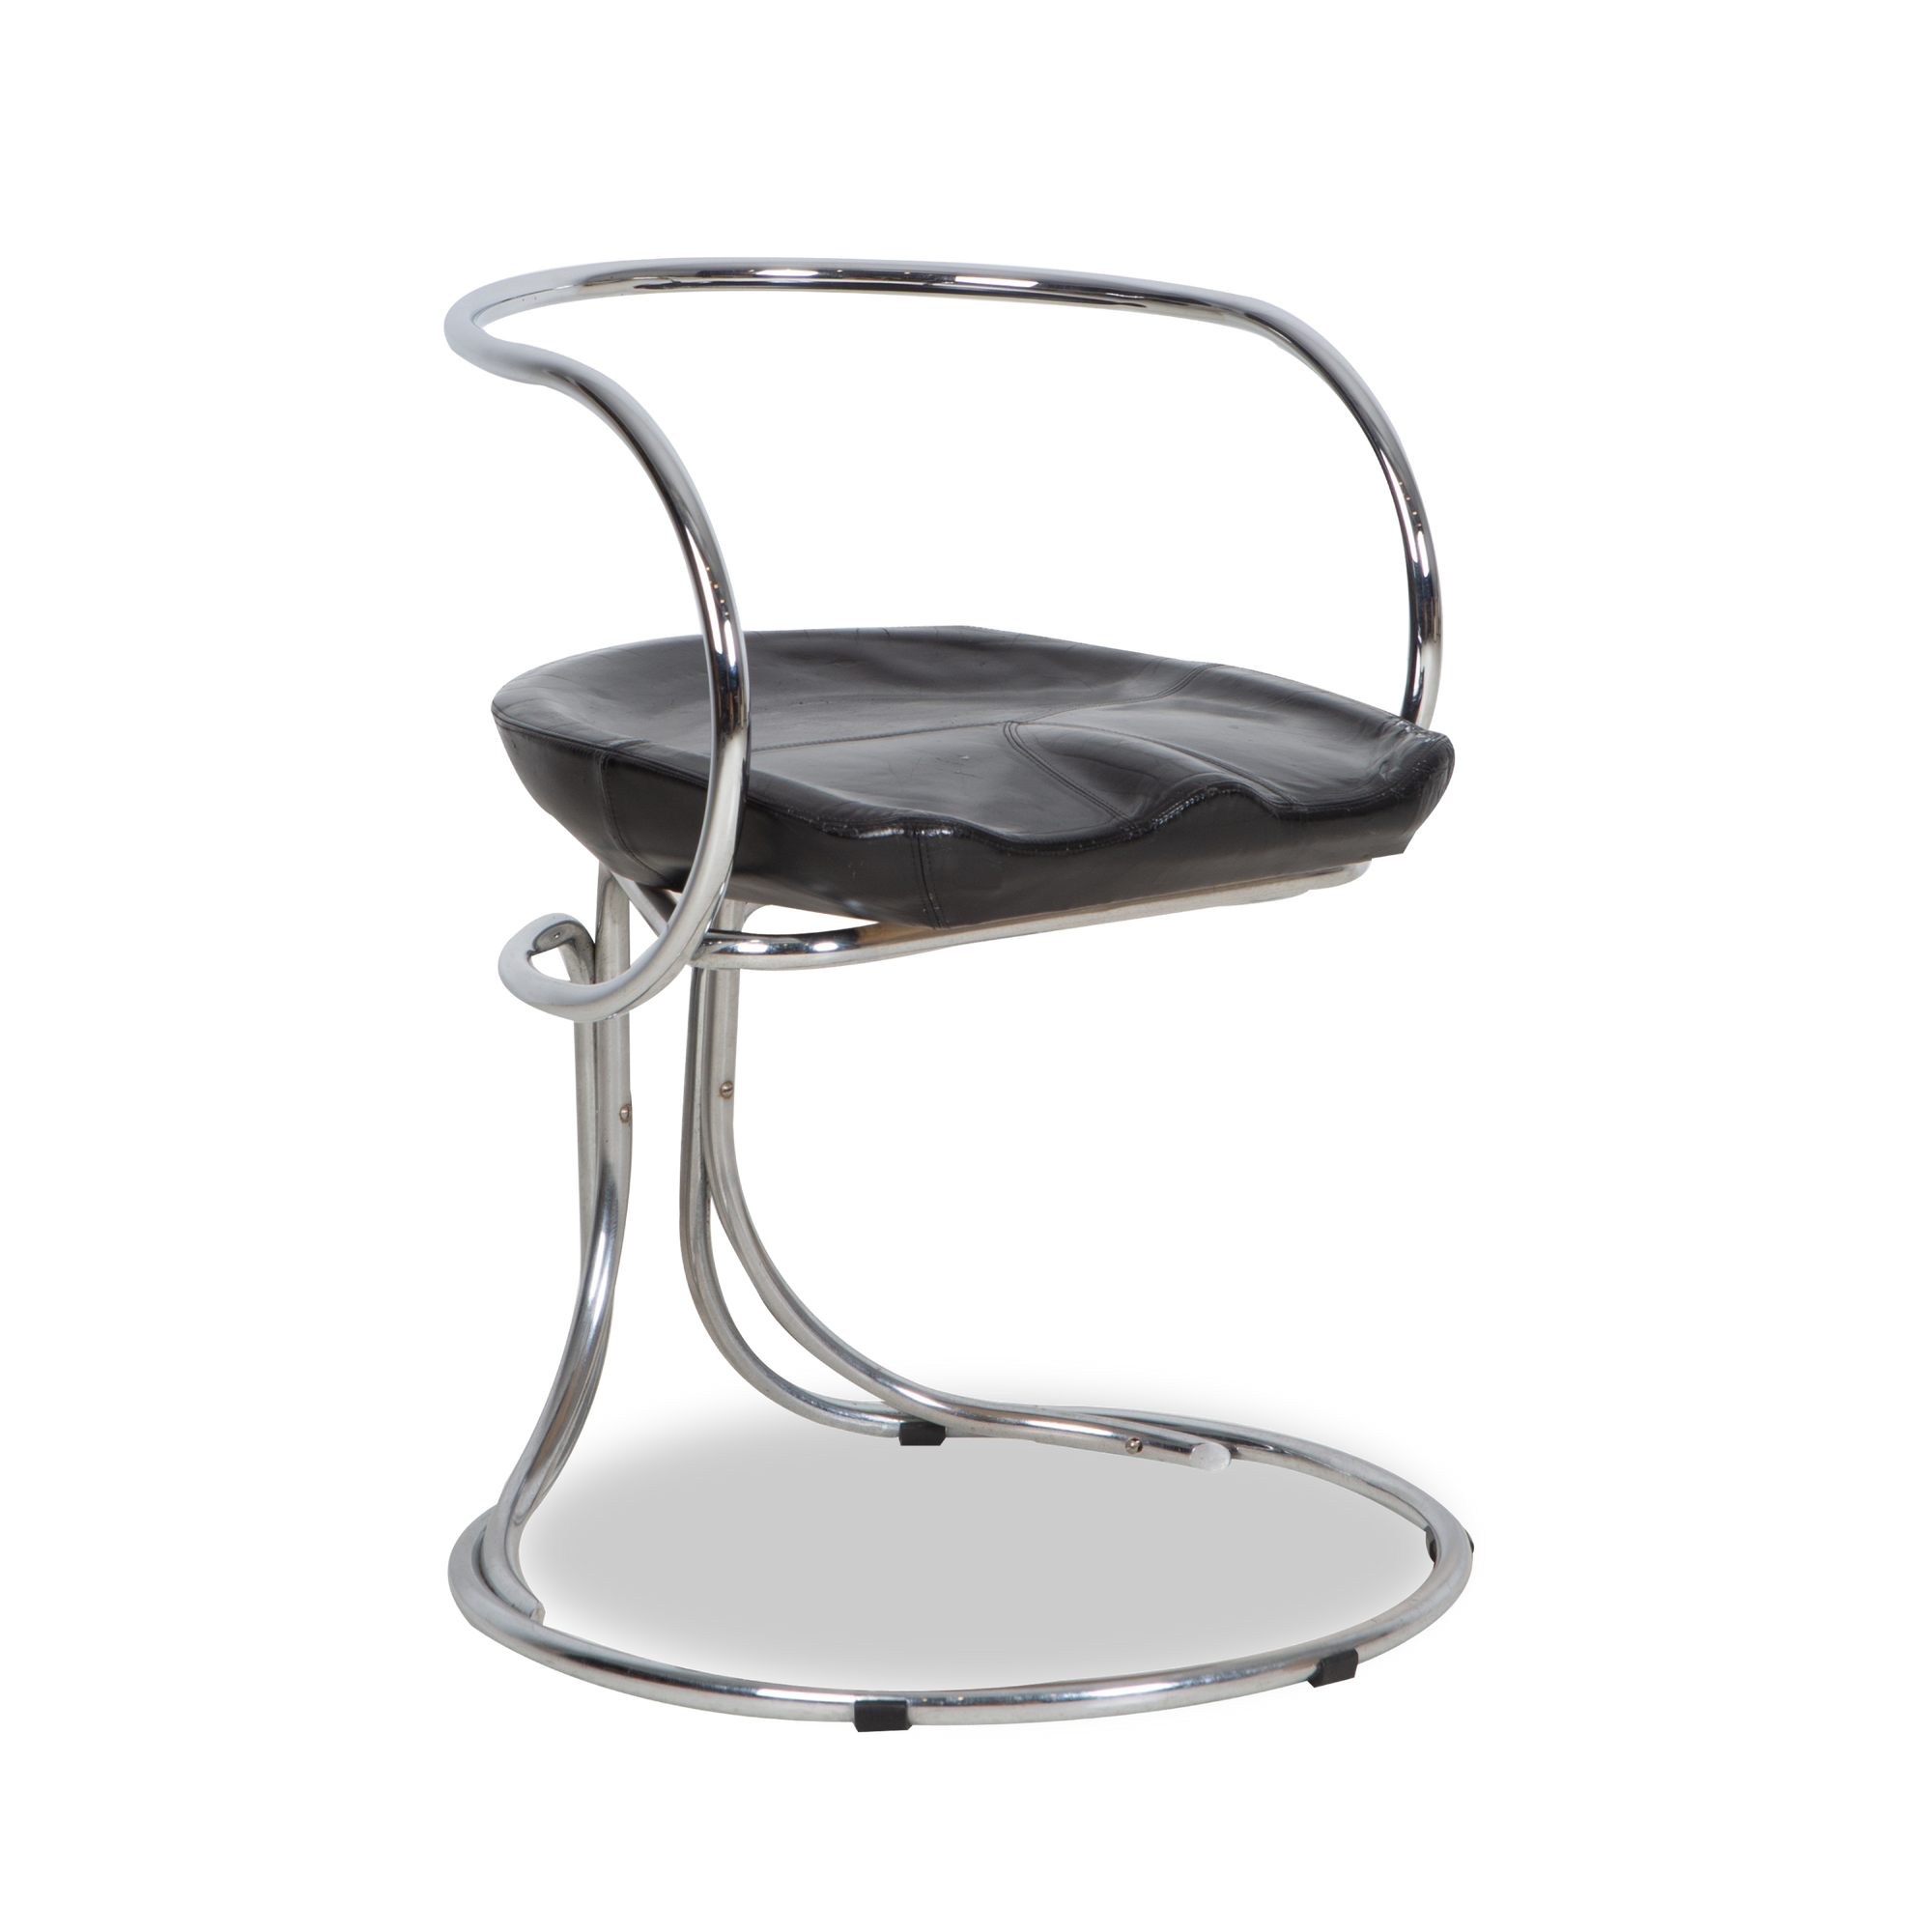 An icon of the constructivist movement, this chair was designed by Vladimir Tatlin and manufactured by Nikoli Internazionale, circa 1970s.